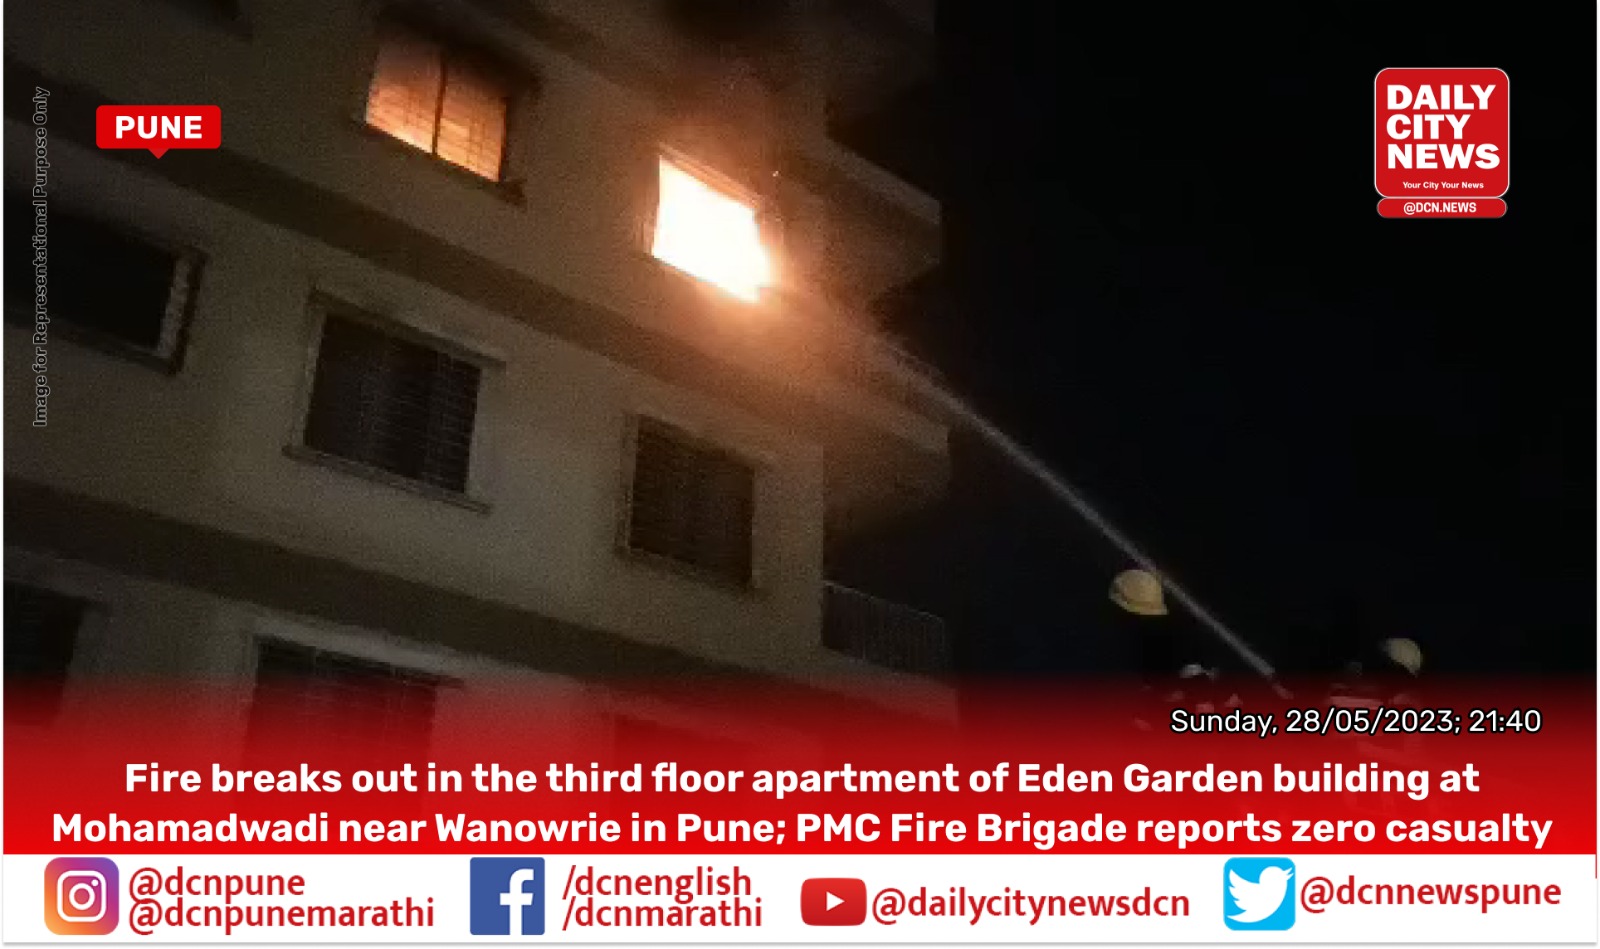 Fire breaks out in the third floor apartment of Eden Garden building at Mohamadwadi near Wanowrie in Pune; PMC Fire Brigade reports zero casualty